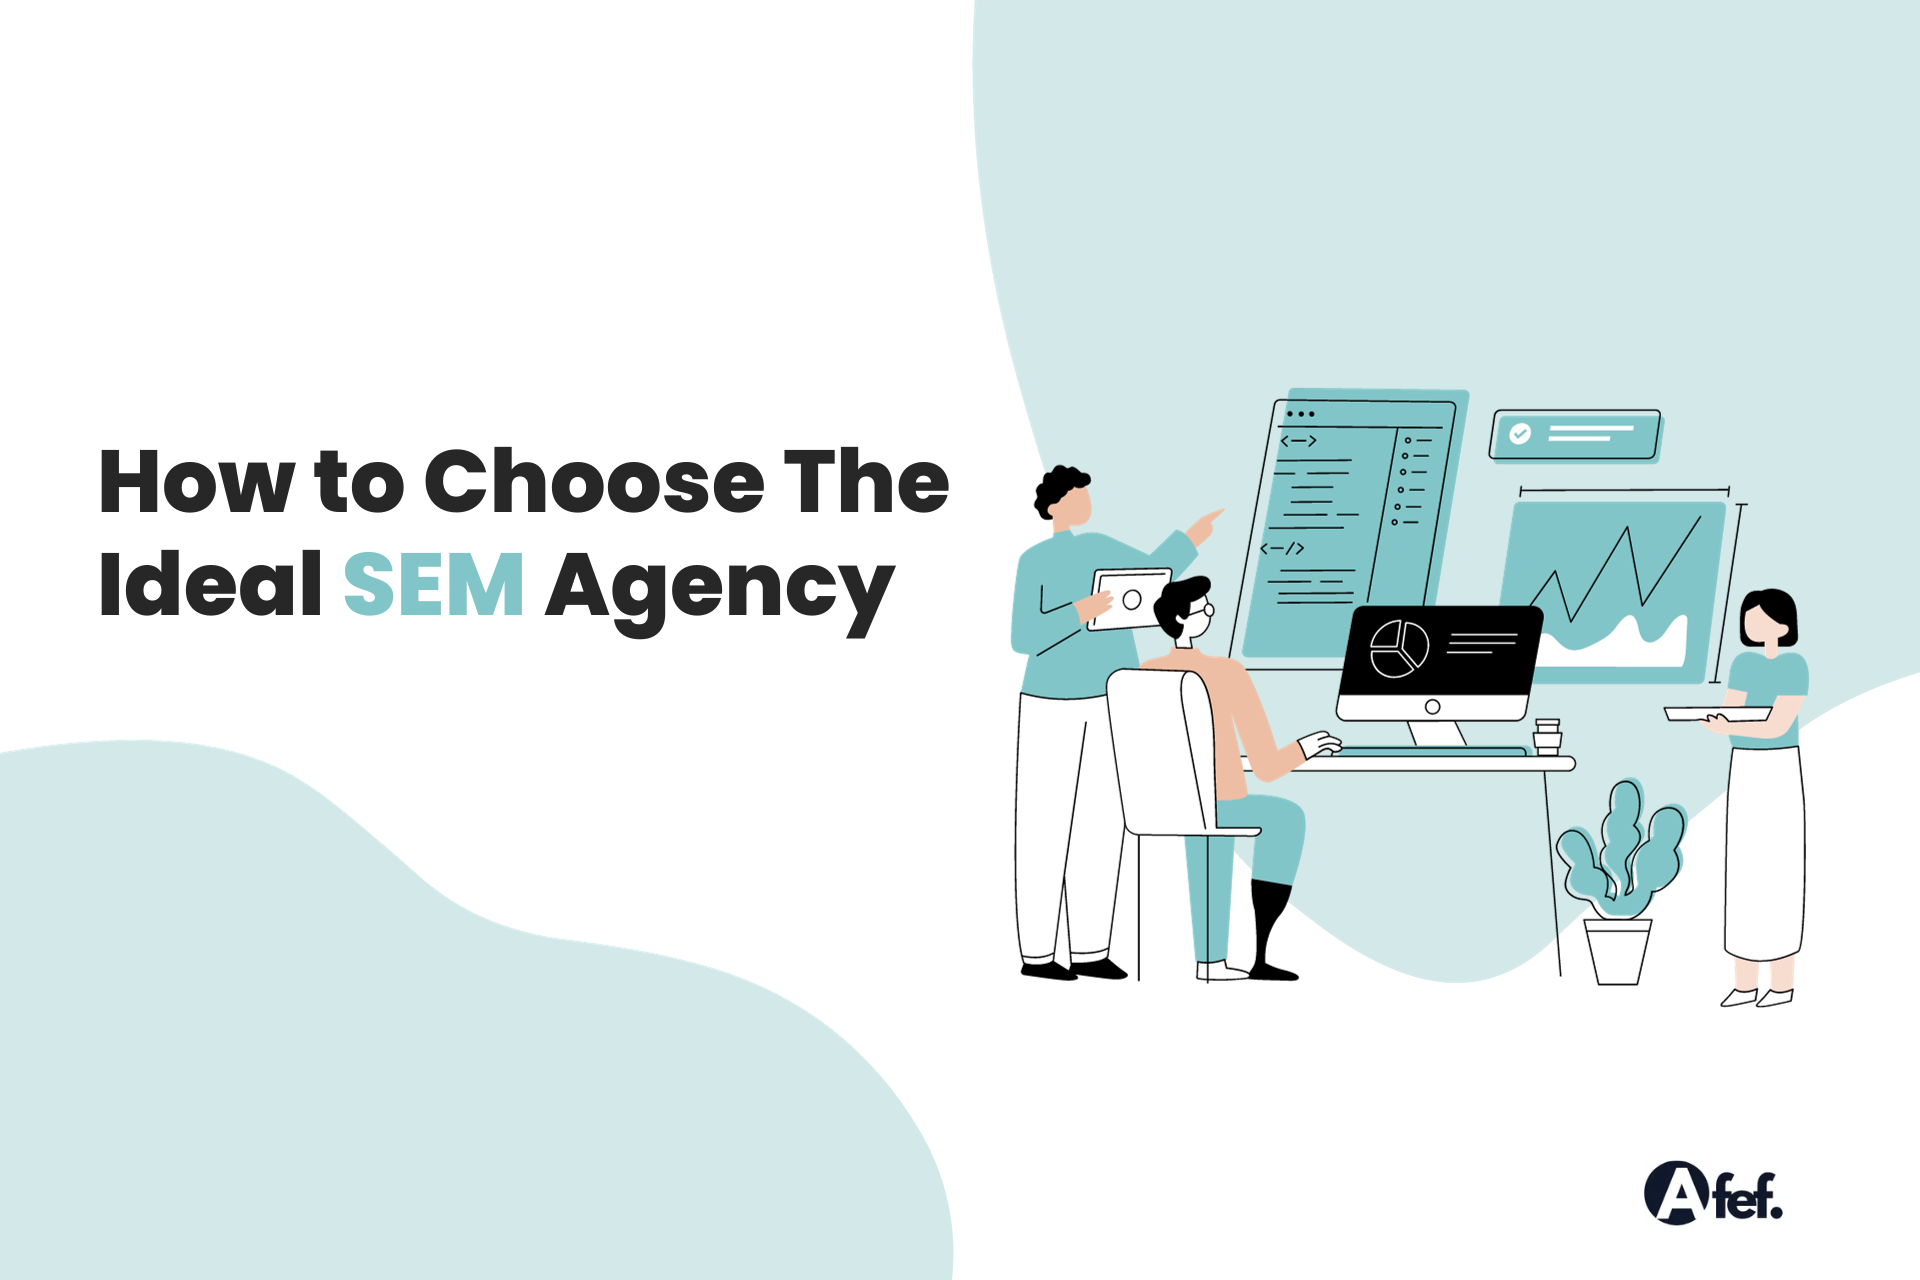 How to choose the Ideal SEM Agency